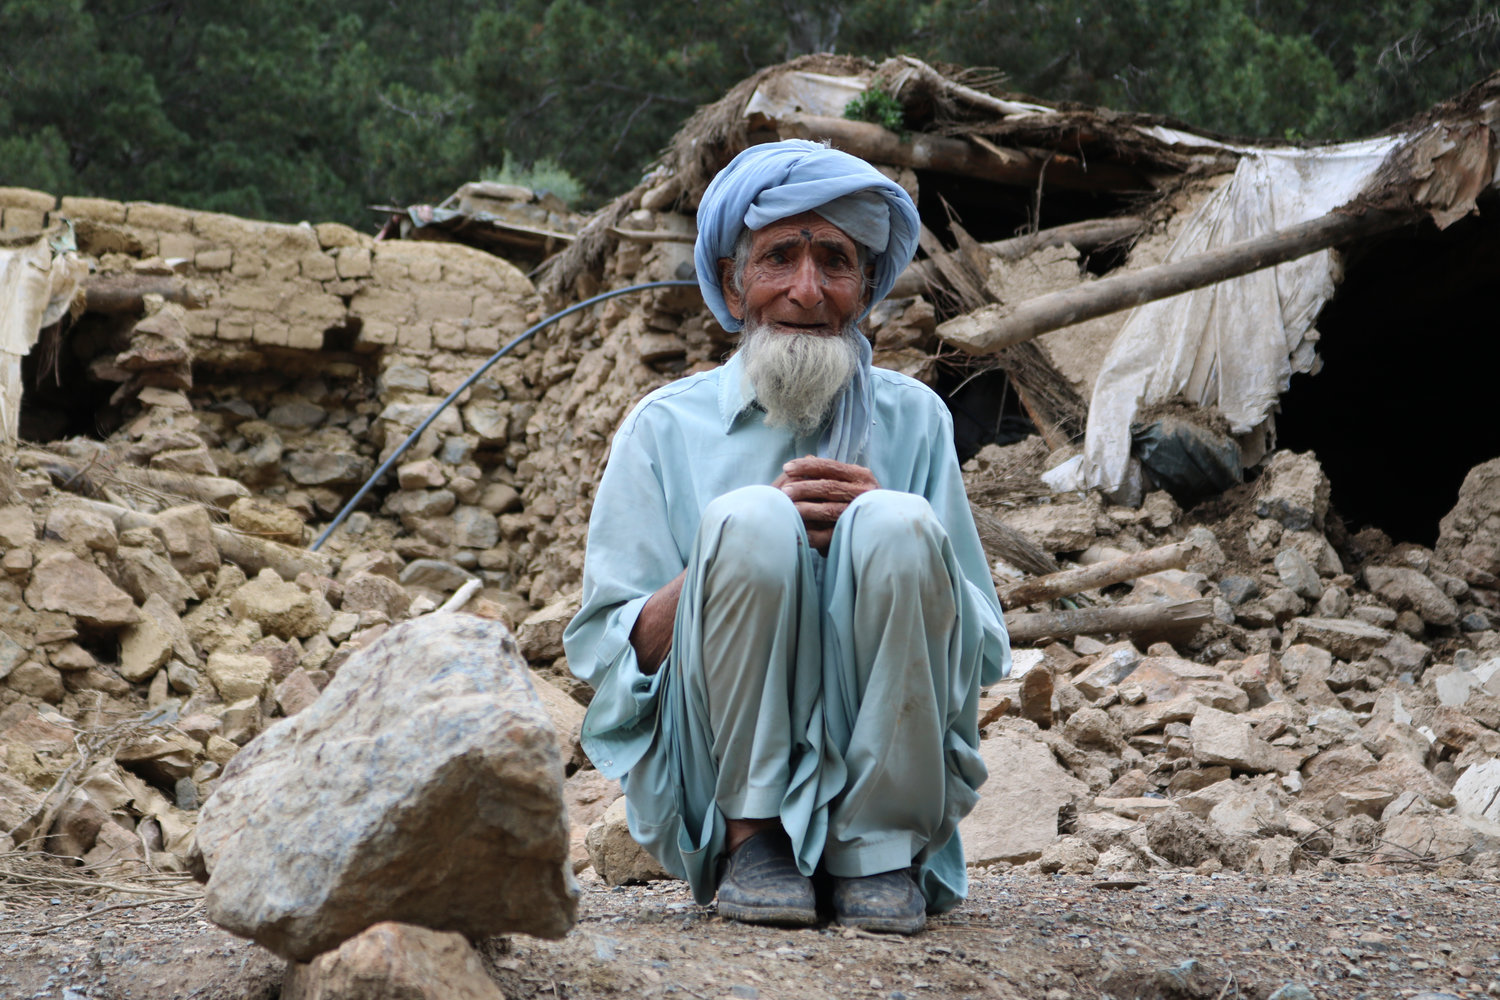 An Afghan man sits near his house that was destroyed in an earthquake in the Spera District of the southwestern part of Khost Province, Afghanistan, Wednesday. The powerful earthquake struck a rugged, mountainous region of eastern Afghanistan.